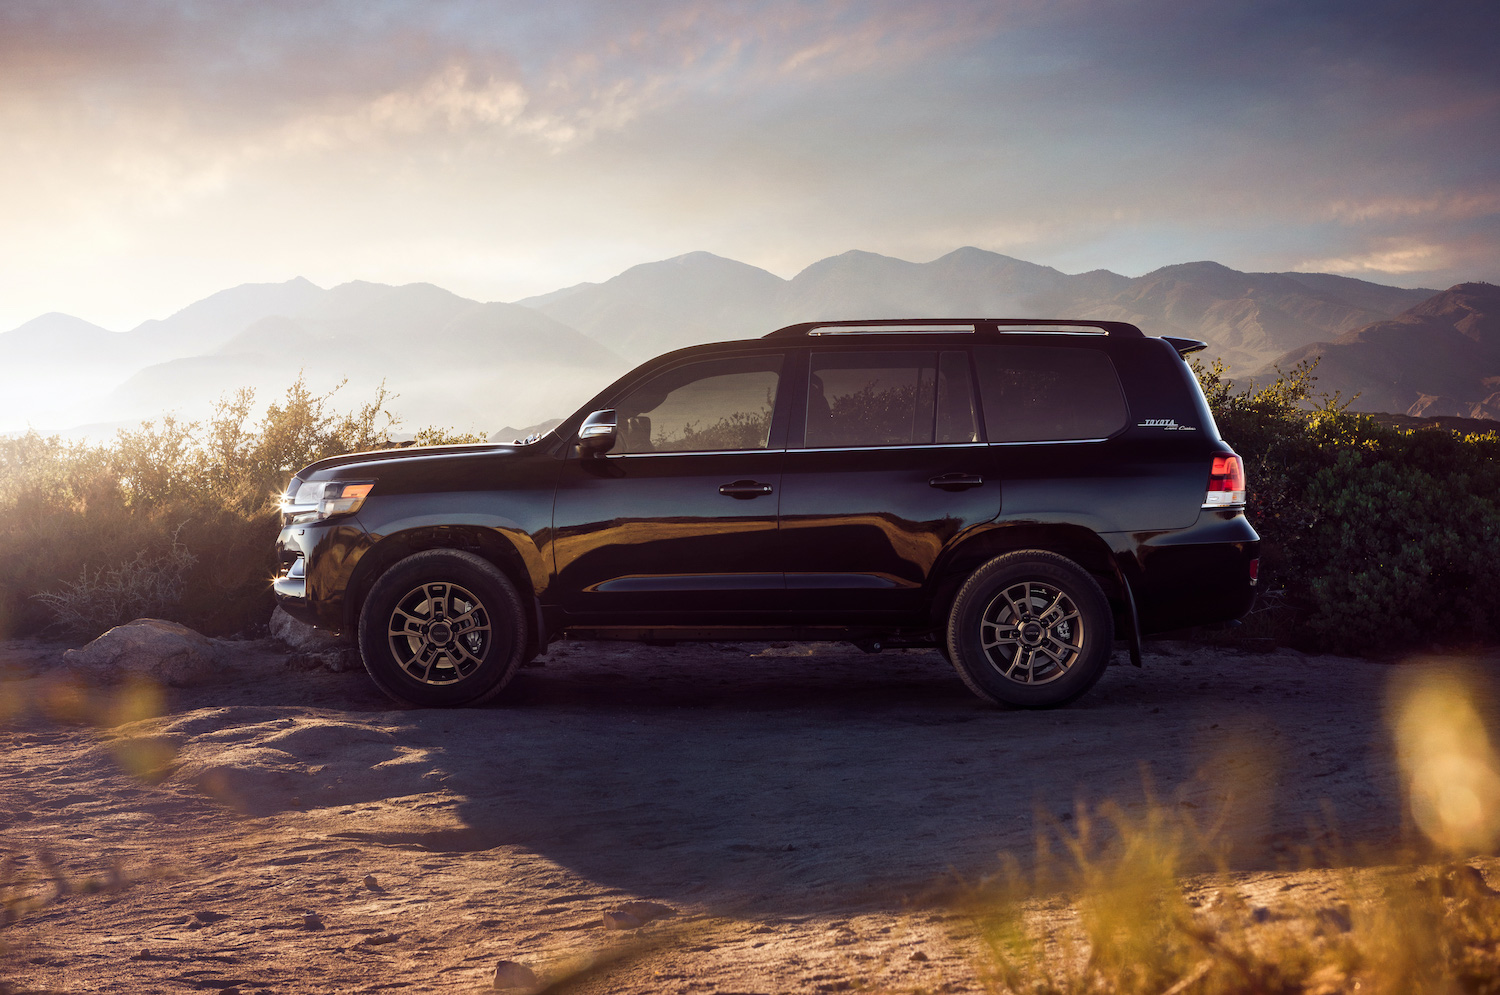 The 2022 Toyota Land Cruiser Model Debut Is Delayed Again